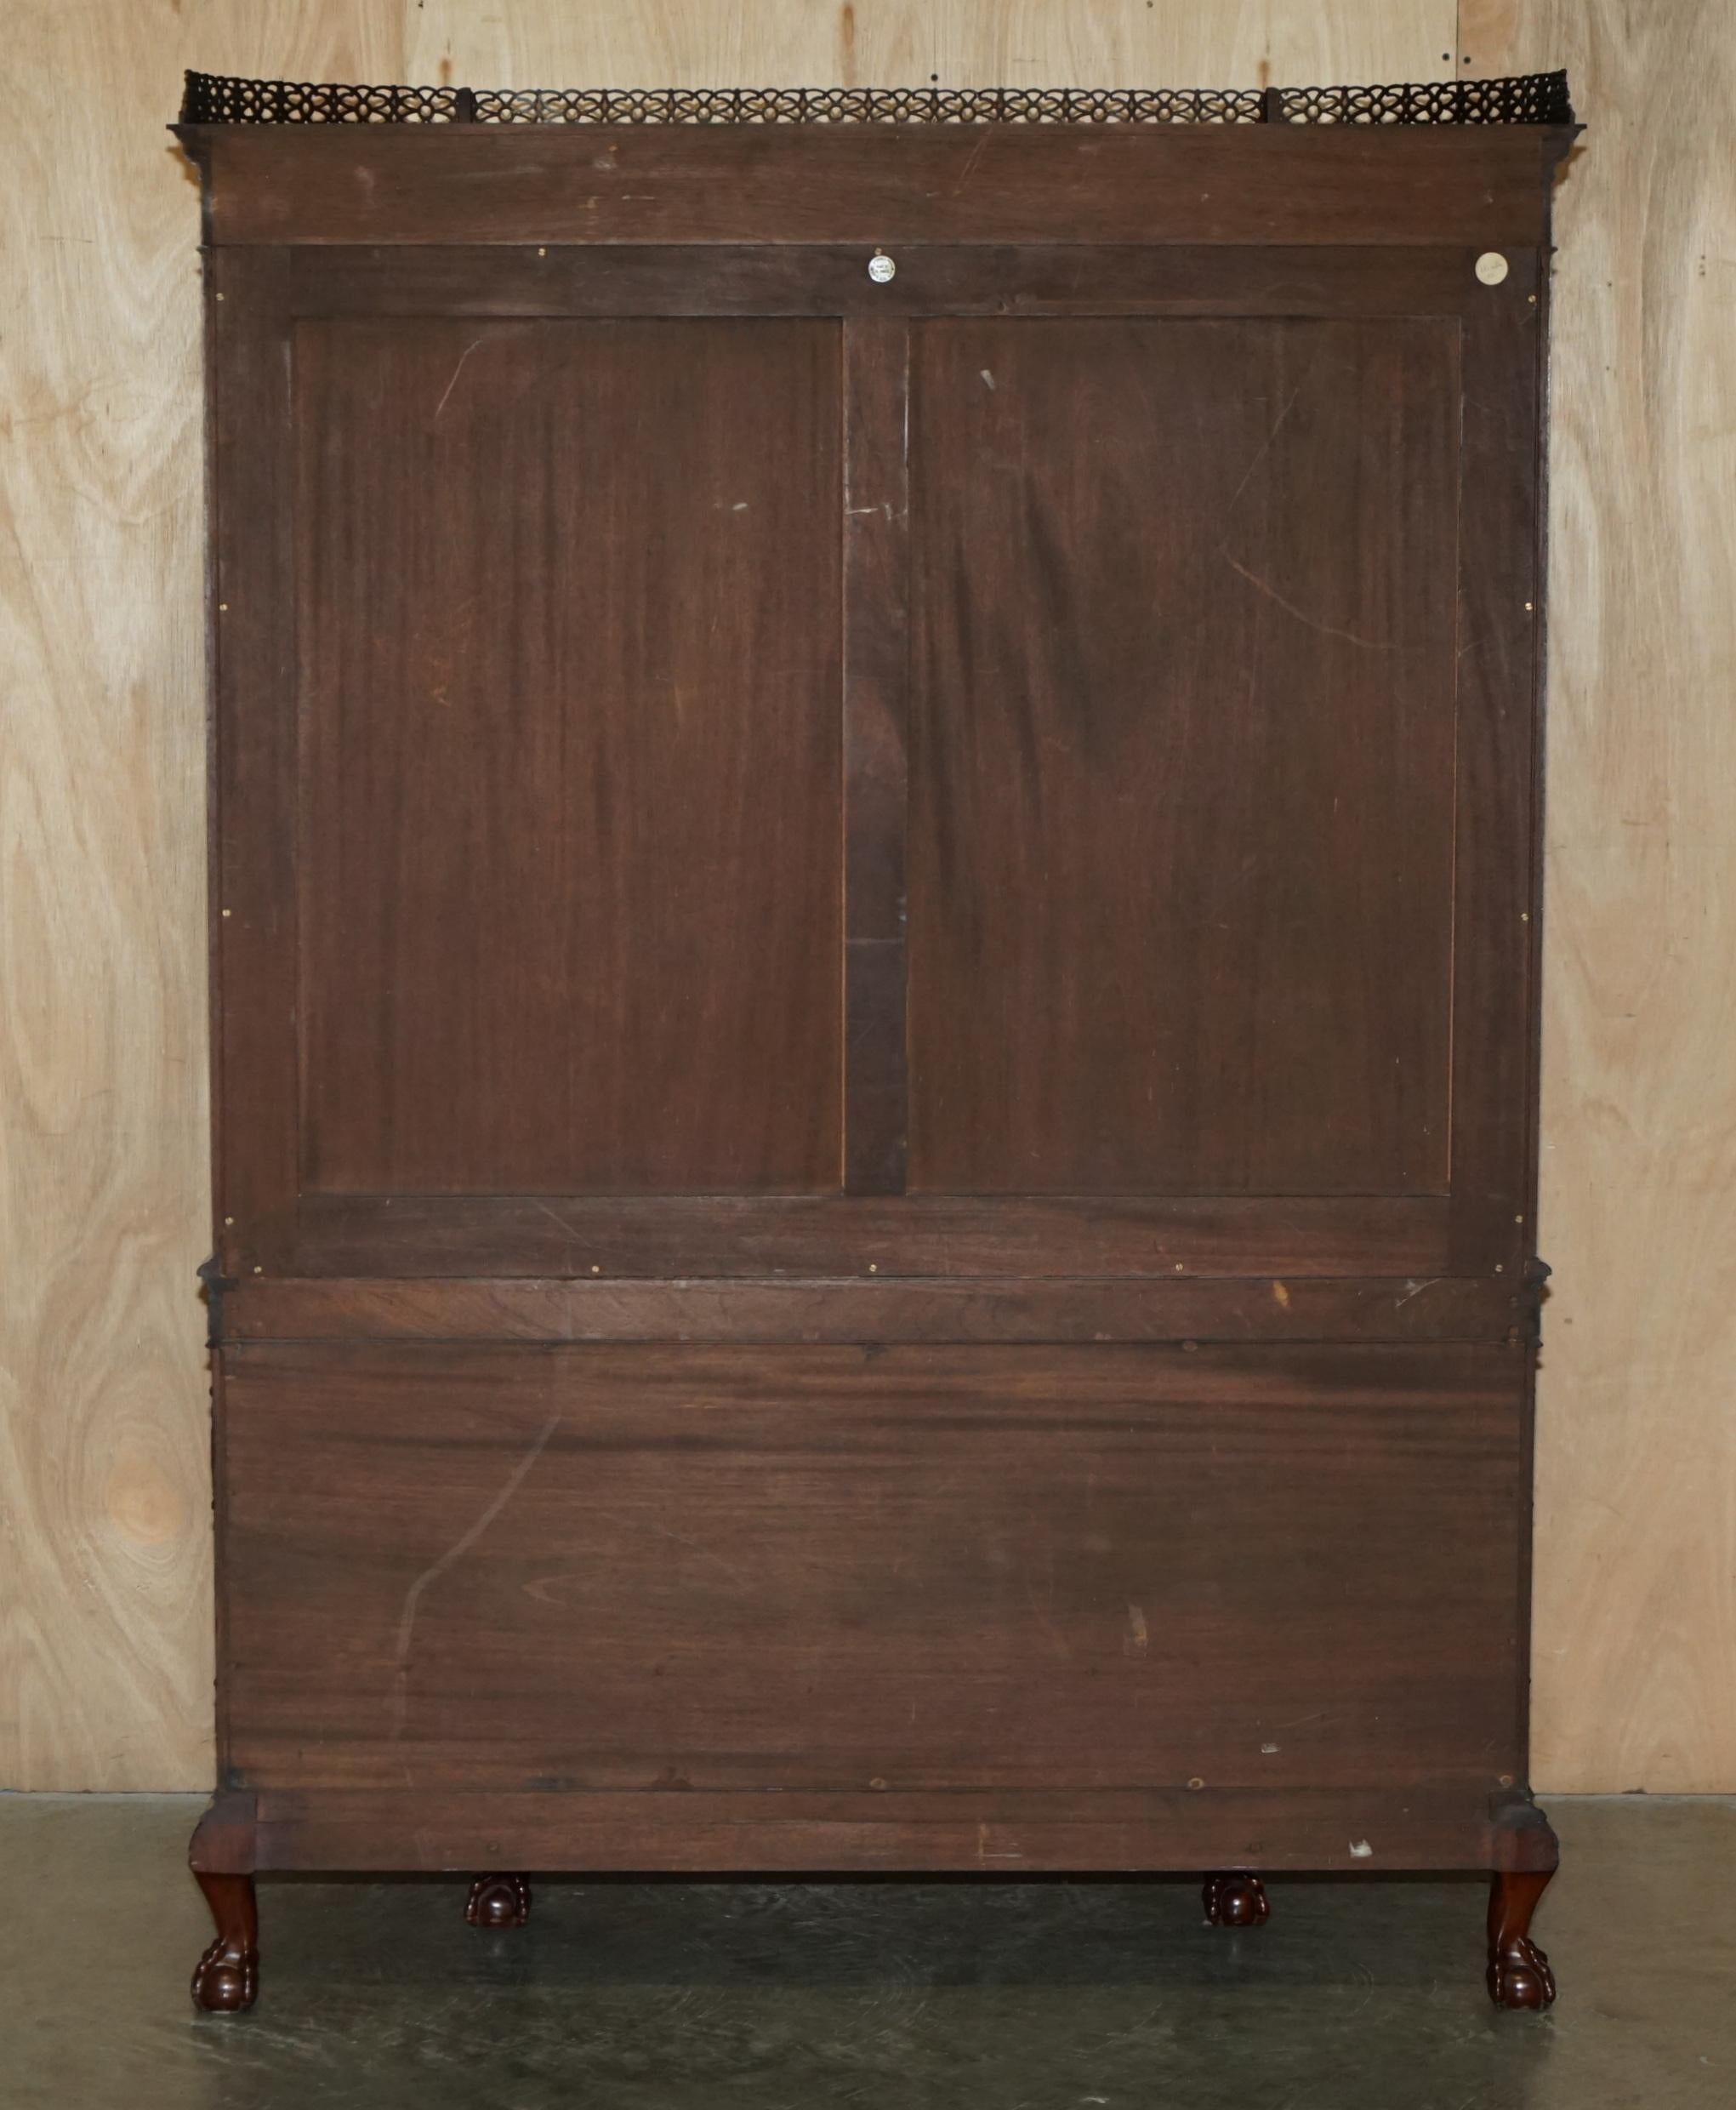 EXQUISITÉ CHARLES BAKER OF CHIPPENDALE HOUSE STAMPED DISPLAY CABINET en vente 6